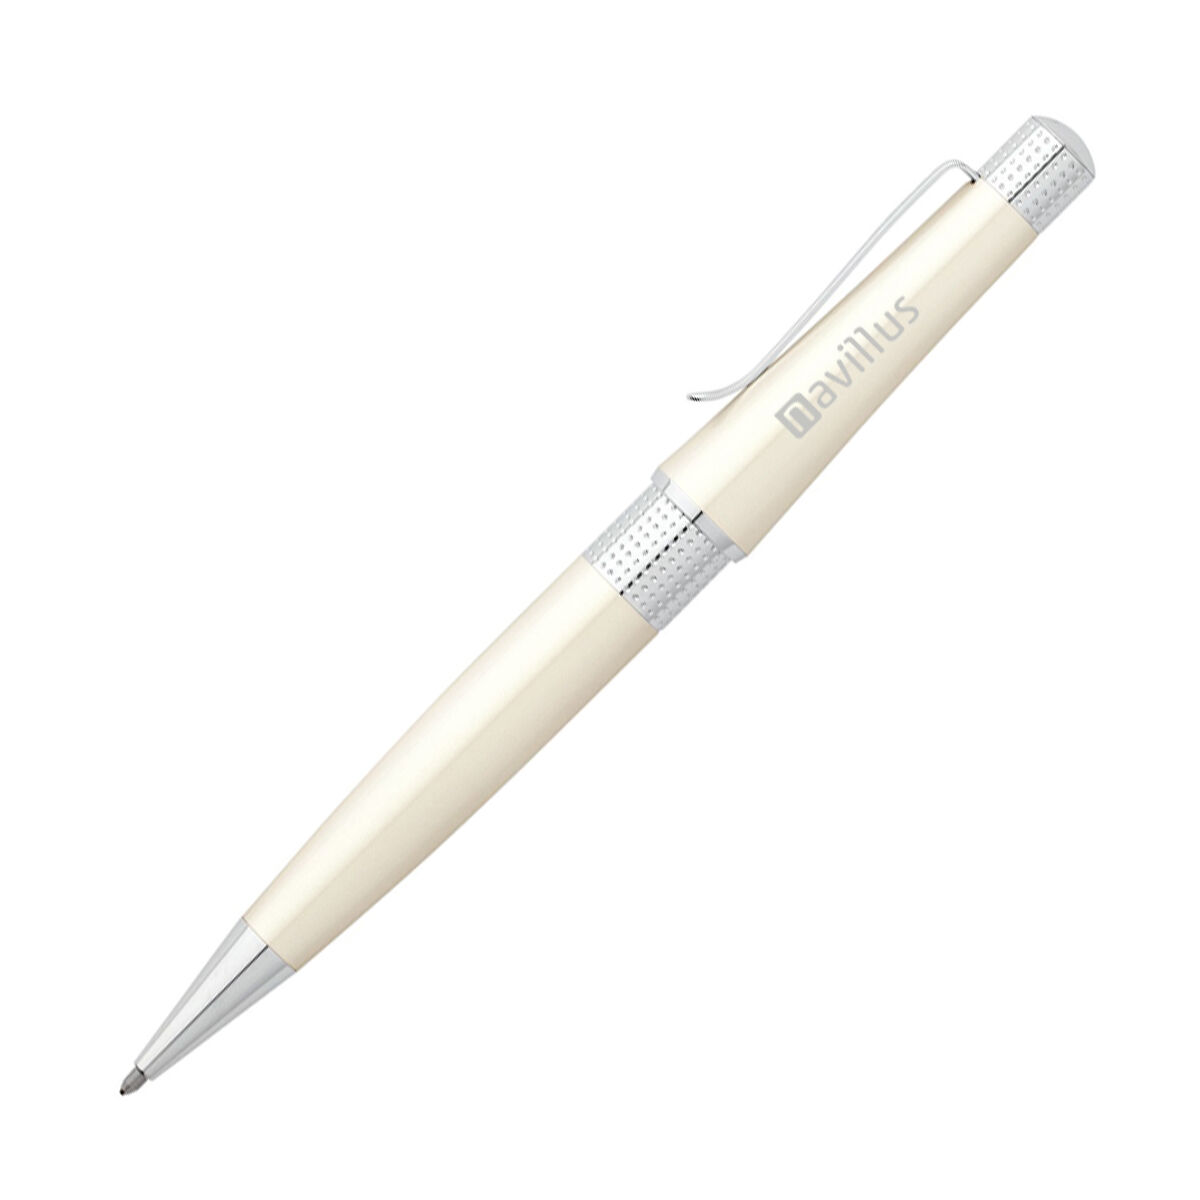 Cross Beverly Pen in Pearlescent White finish